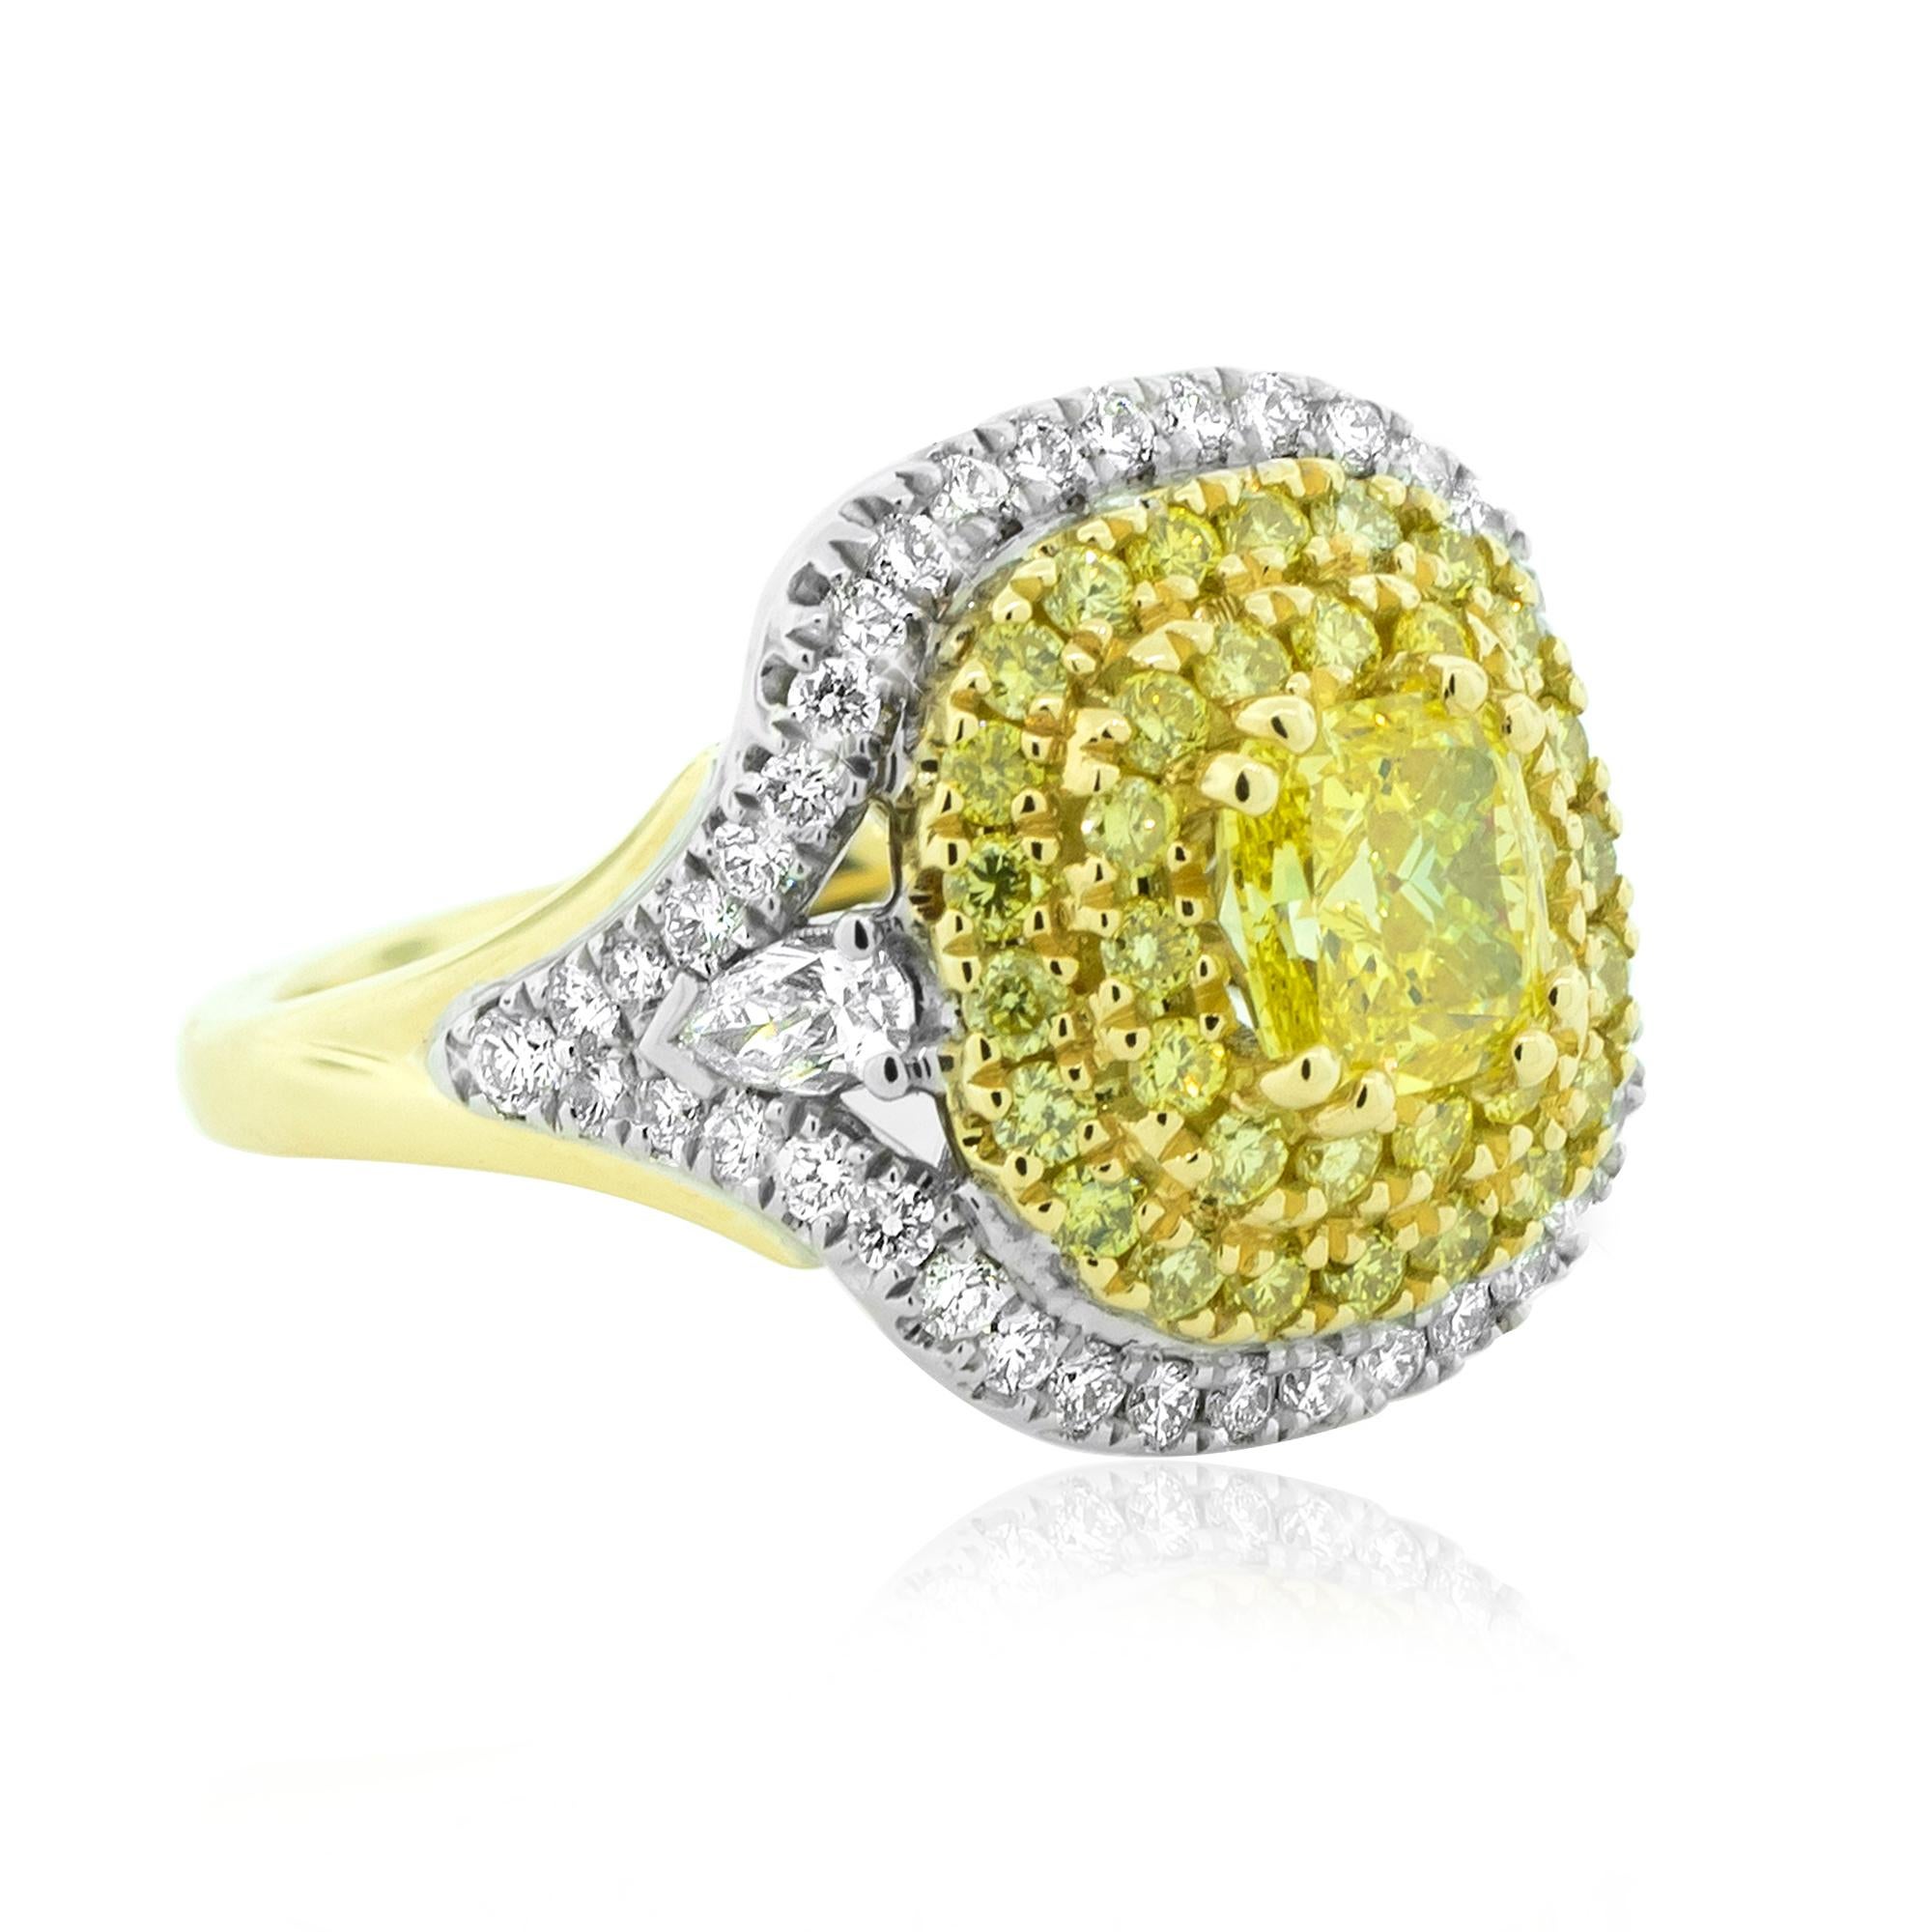 Discover the passion unearthed by the power of Love with this magnificent Amore yellow diamond ring.
Inspired by the idea of love as transformative through touch, this ring features a 1.21ct Radiant cut Fancy Vivid yellow central diamond surrounded